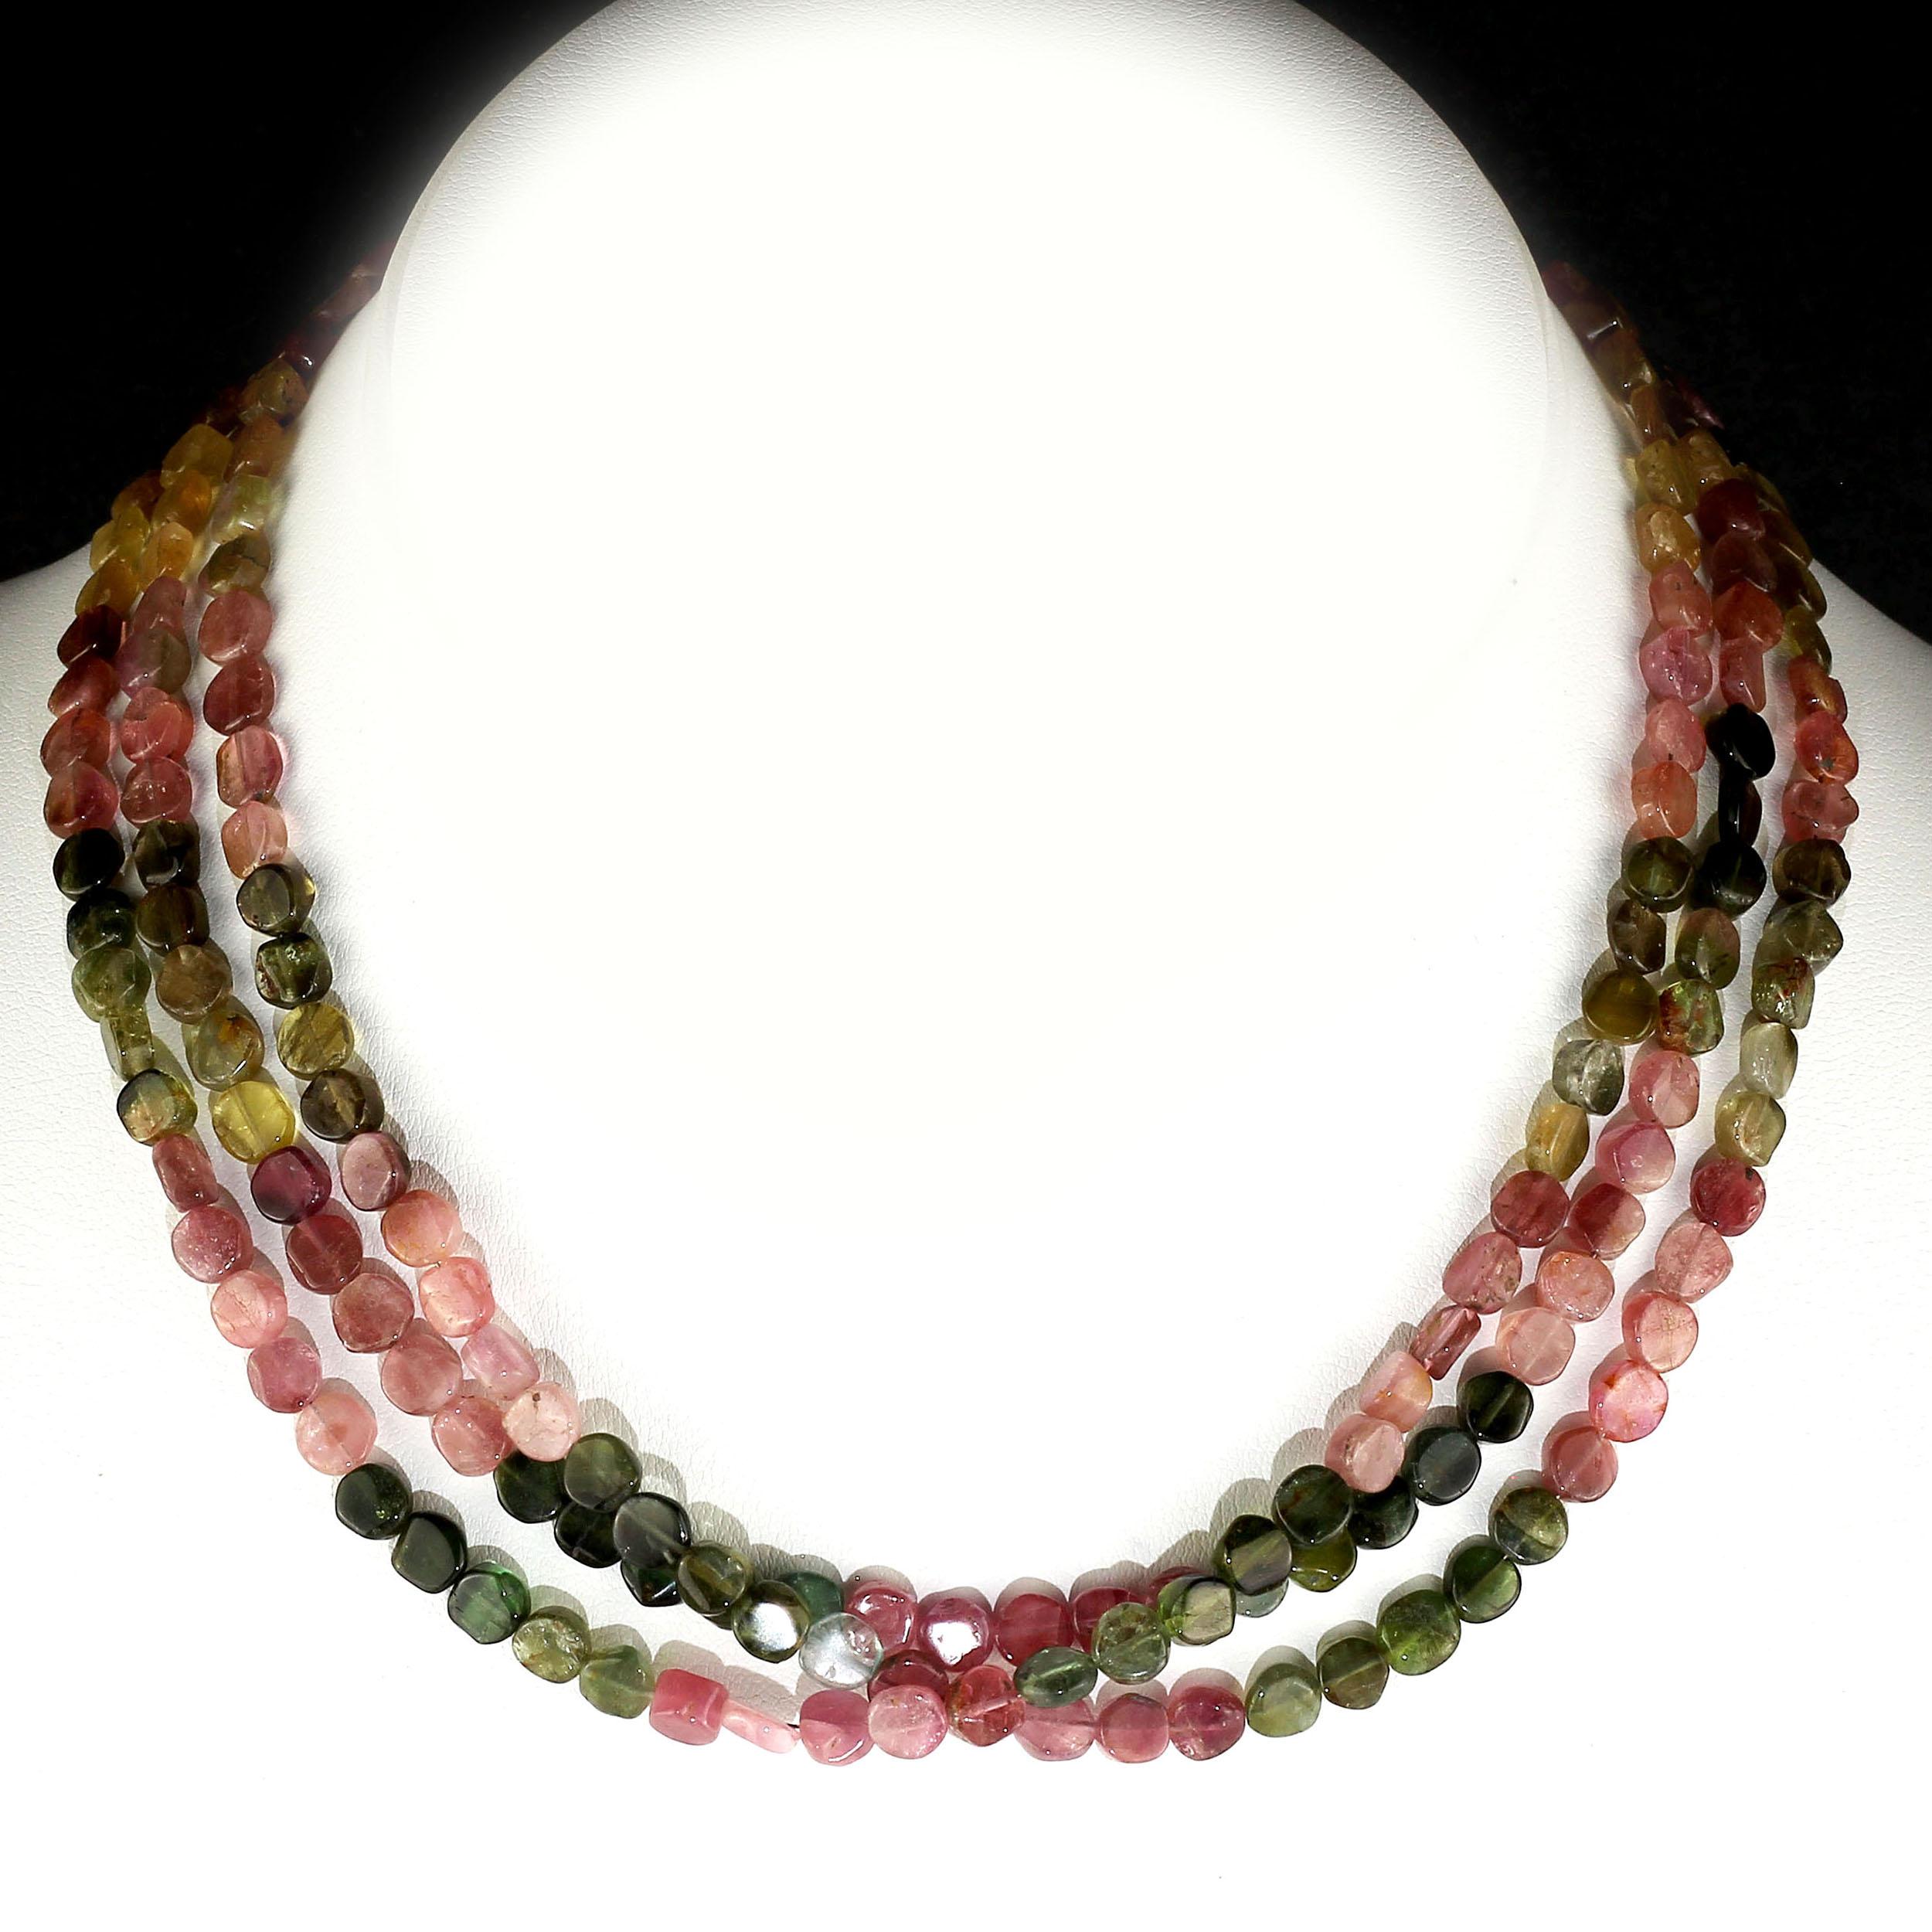 Glowing discs of Tourmalines in all their luscious colors.  These discs are highly polished and in three strands make a very special short choker for all you Tourmaline lovers.  This unique 15 inch choker necklace is secured with a Sterling Silver